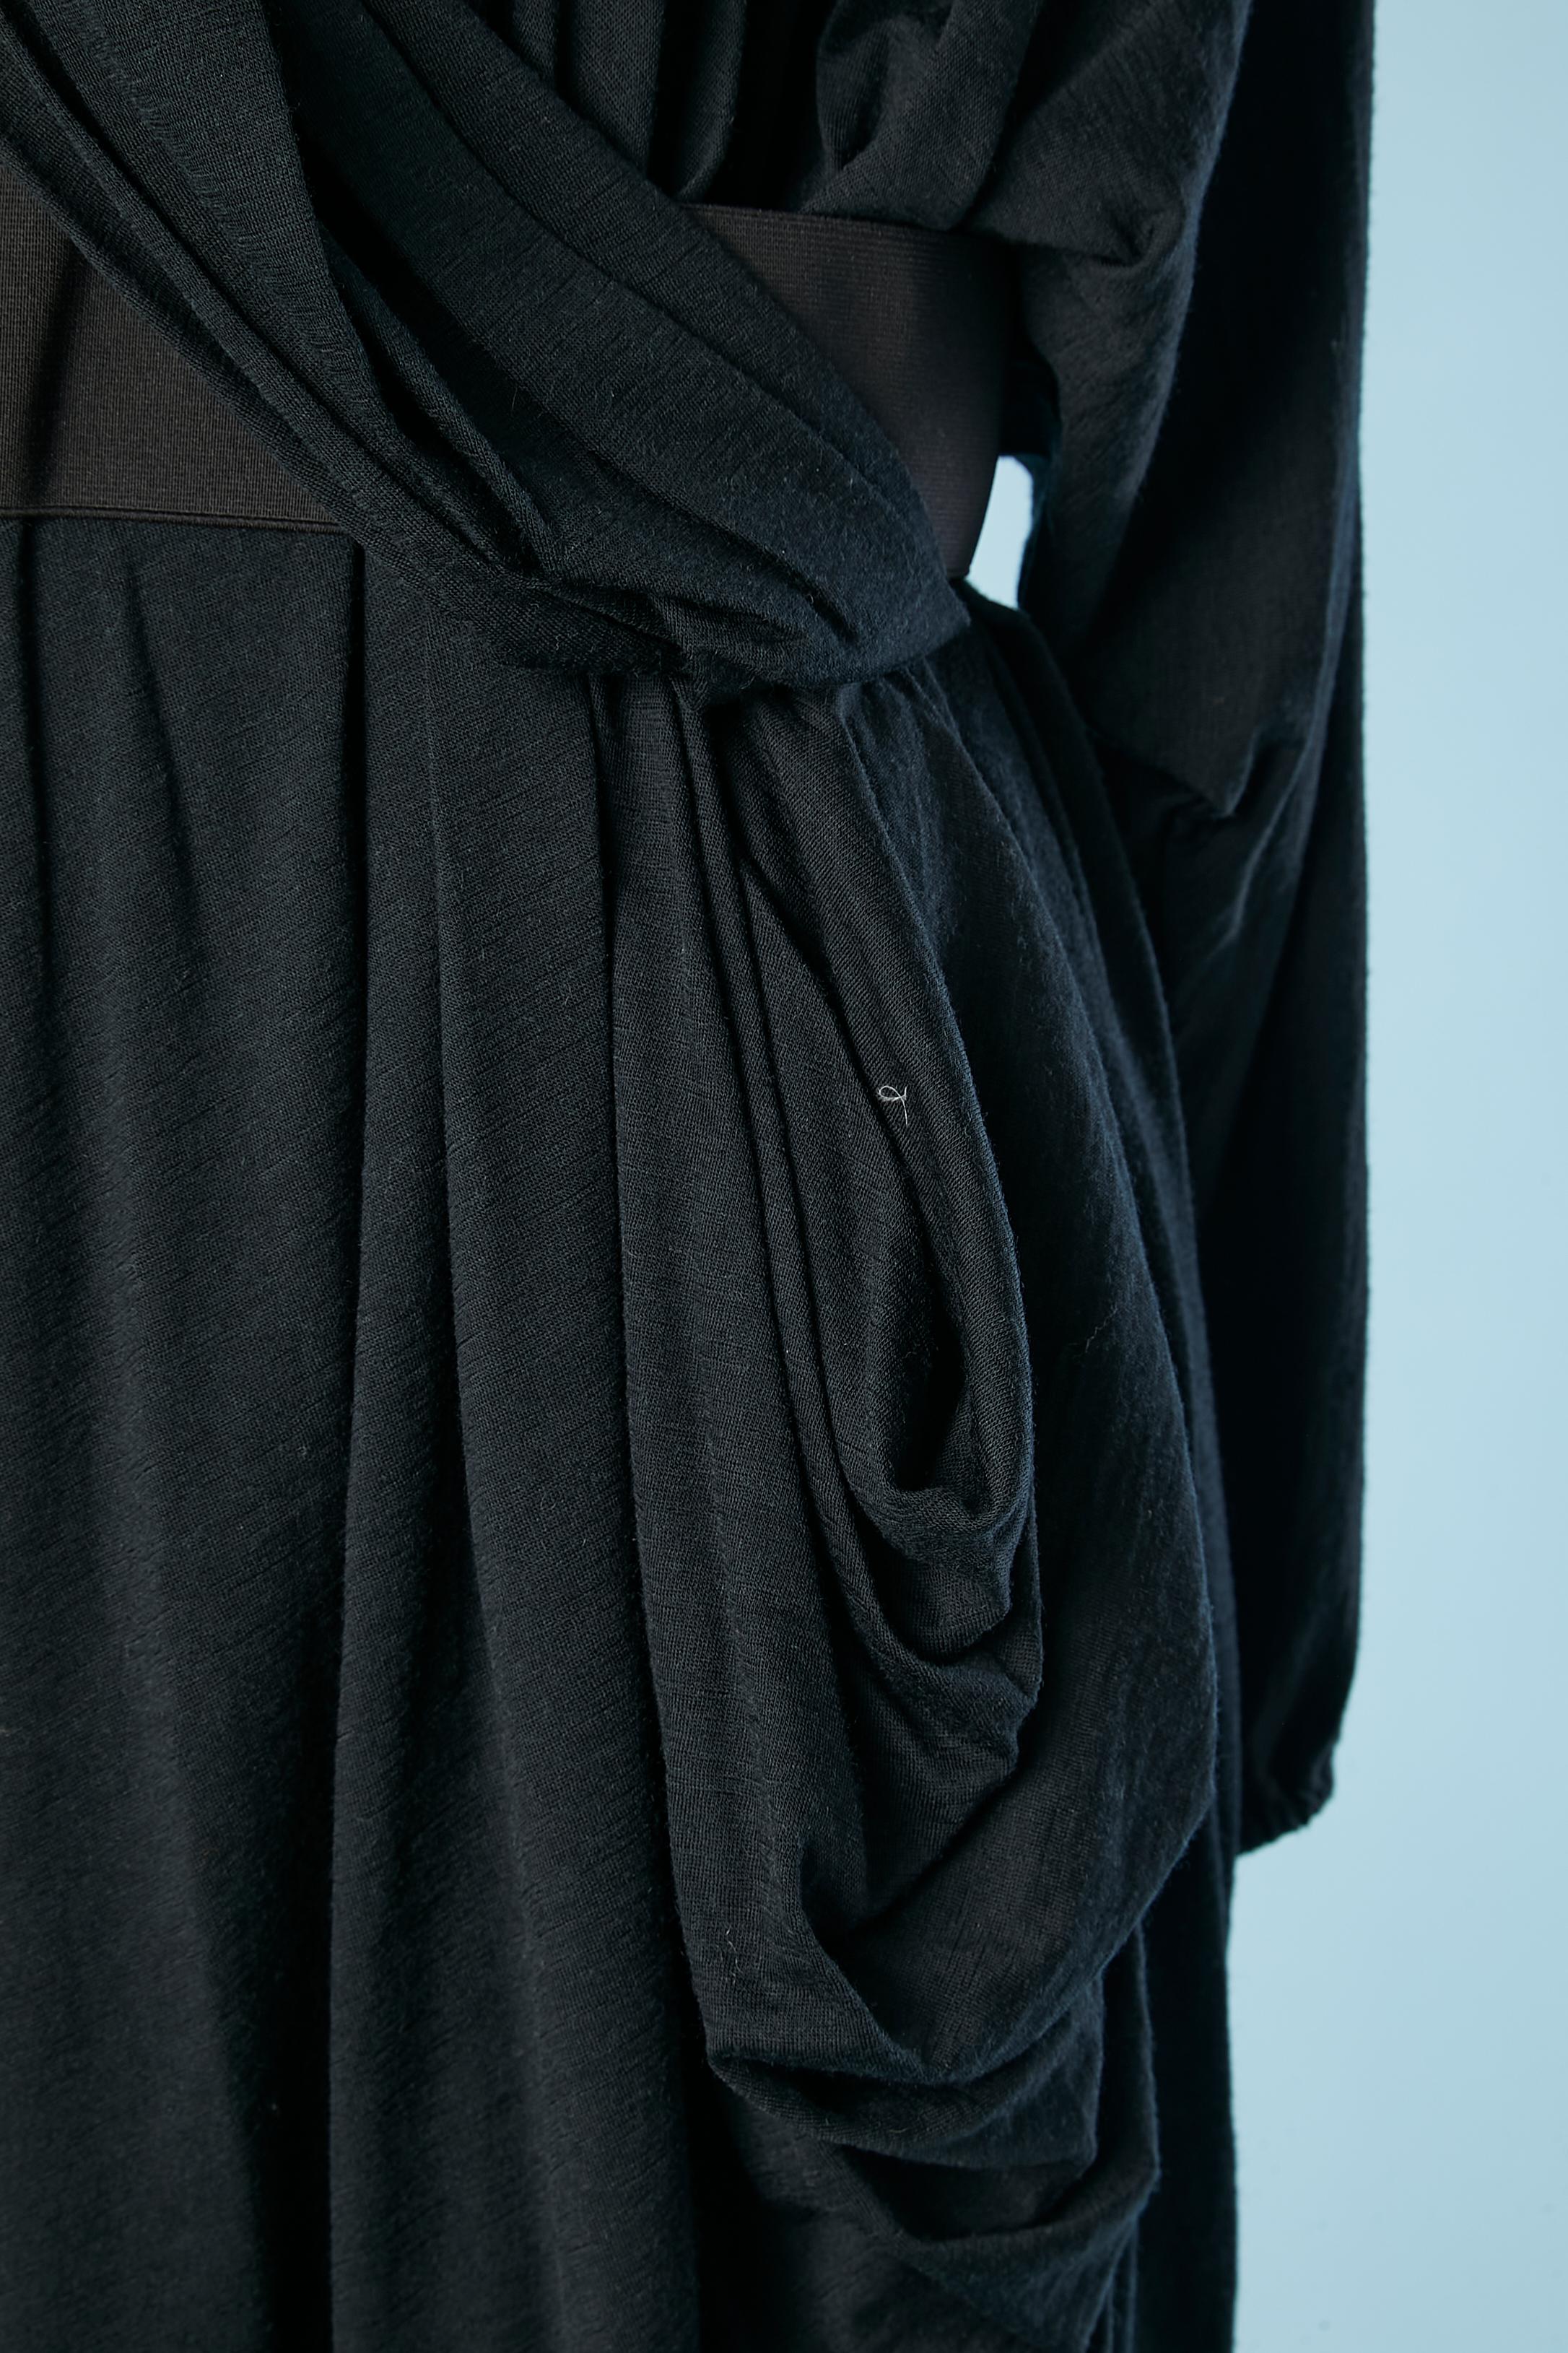 Black Wool drape jersey dress with elastic waist band Lanvin by A.Elbaz for Corso Como For Sale